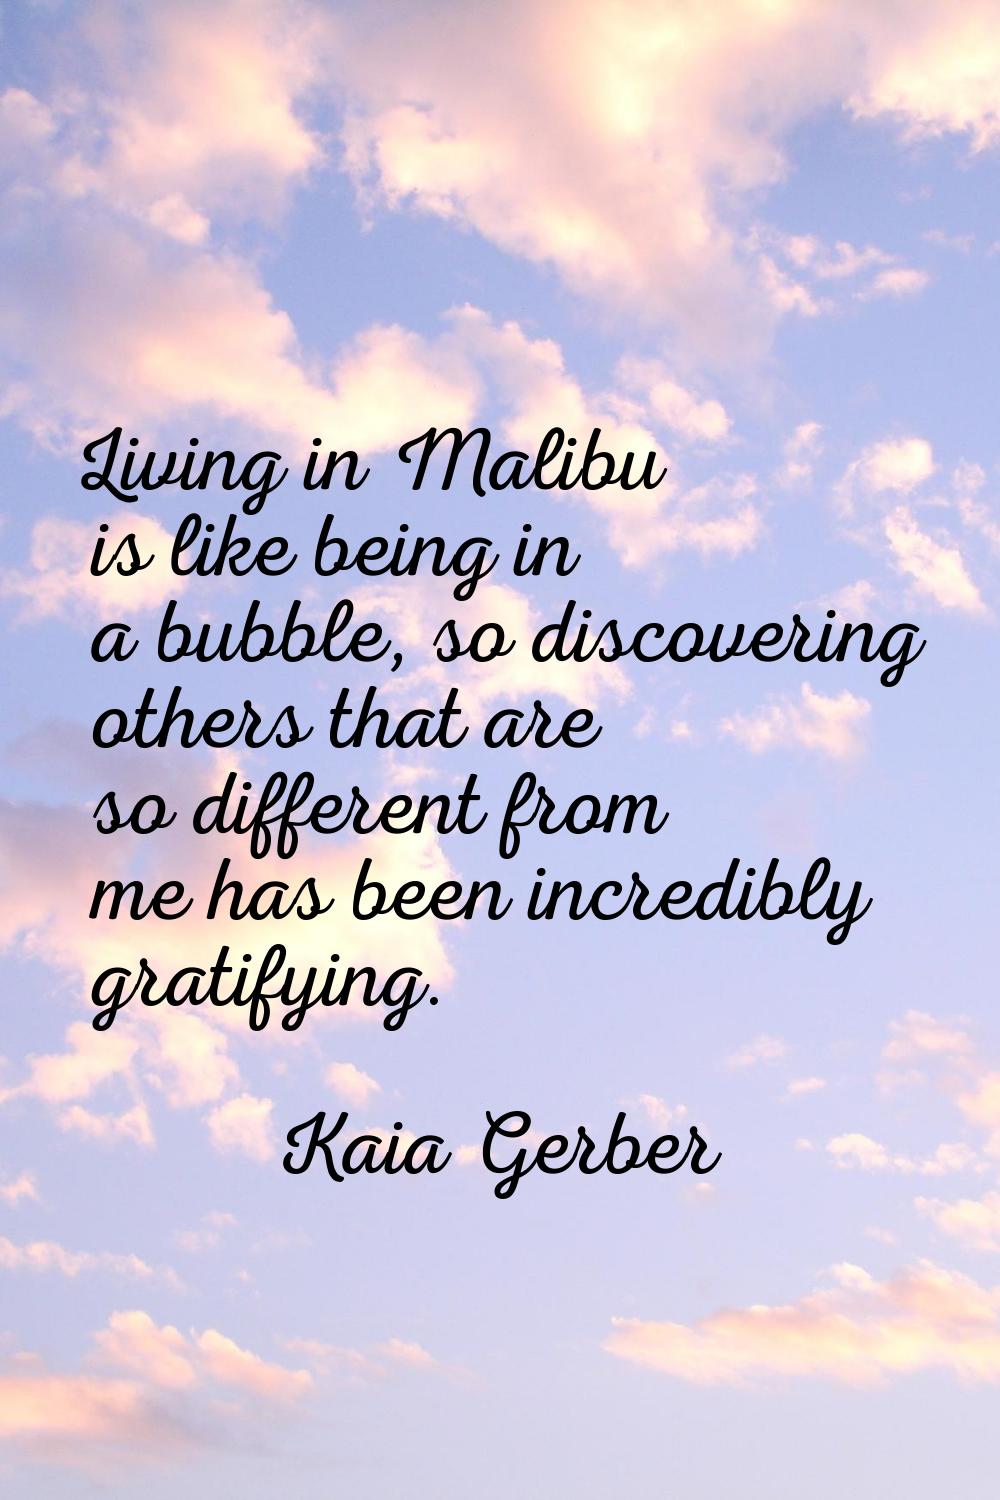 Living in Malibu is like being in a bubble, so discovering others that are so different from me has